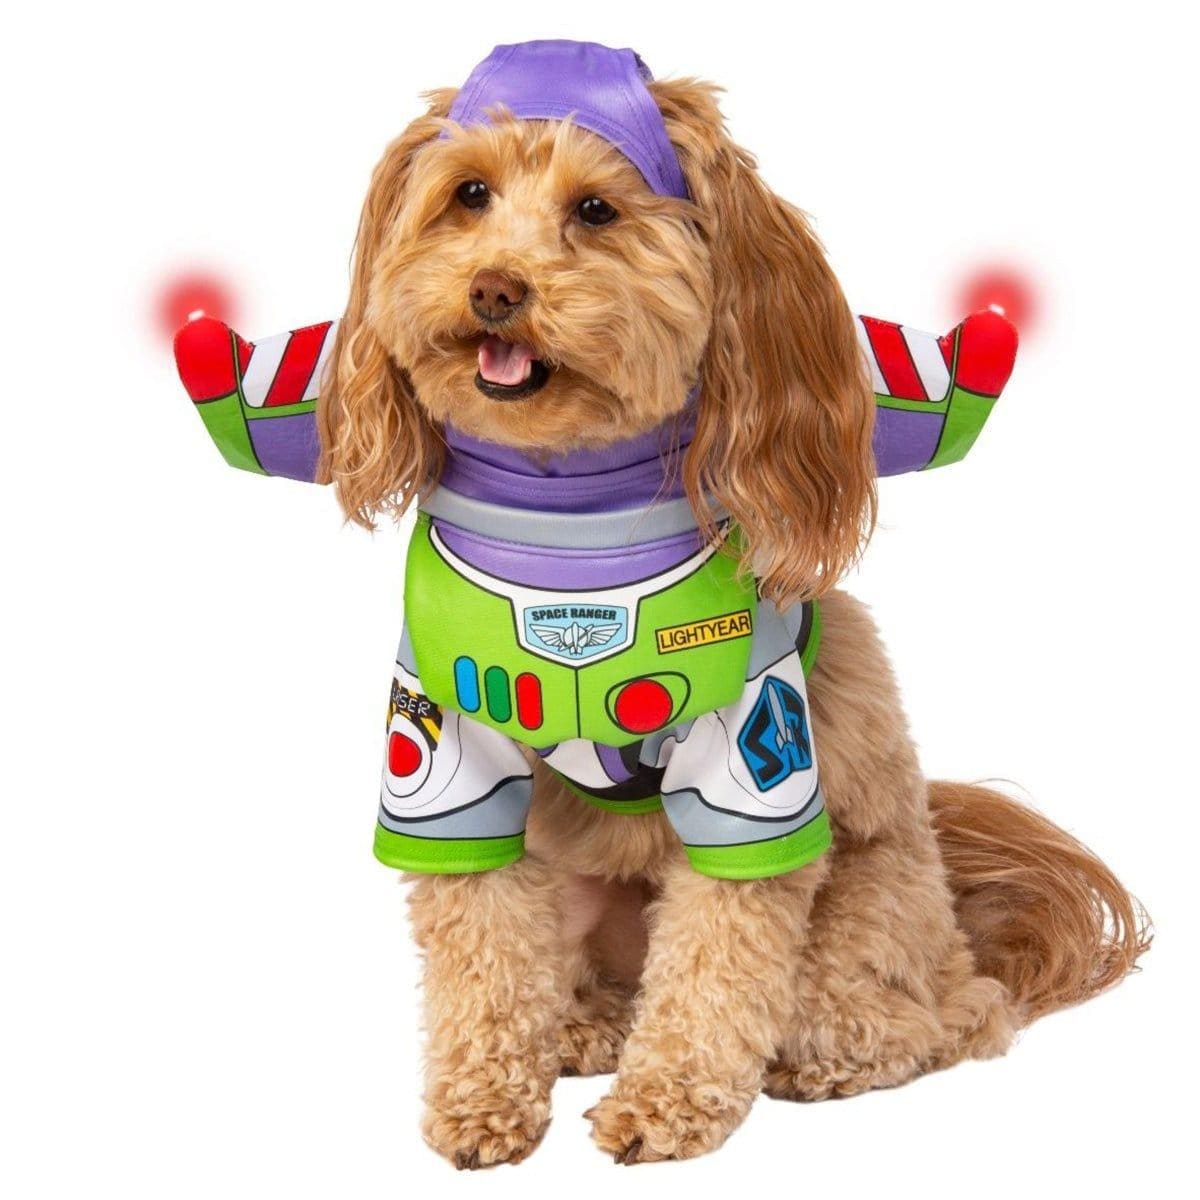 Buy Costumes Buzz Lightyear Costume for Dogs, Toy Story sold at Party Expert